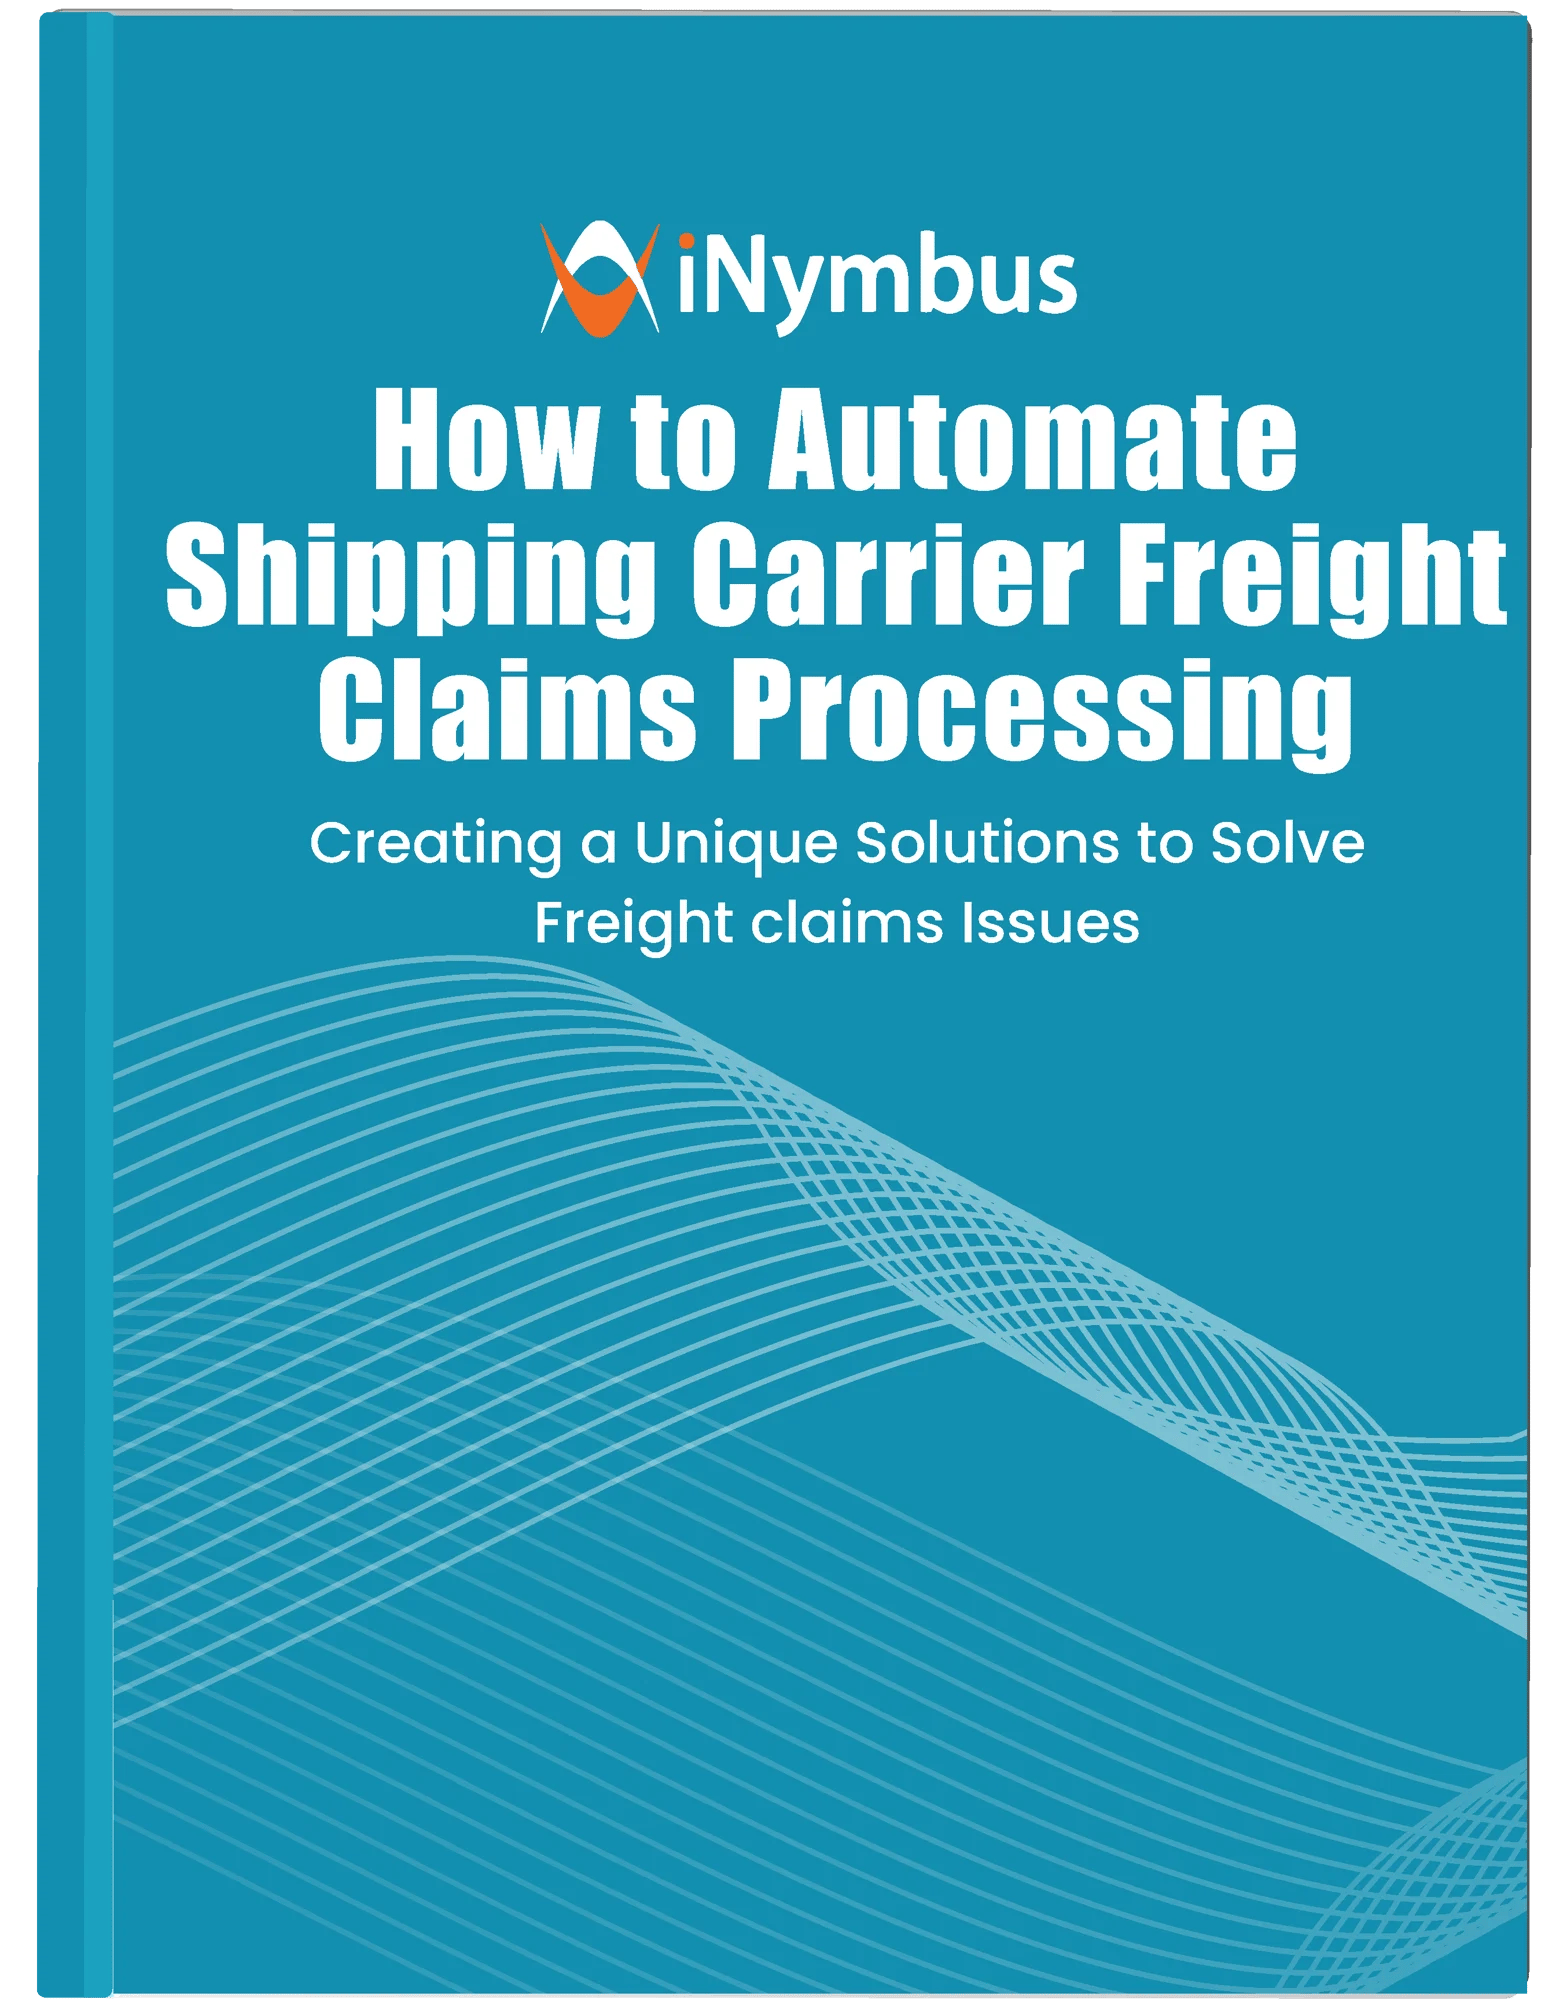 Automating Freight Claims